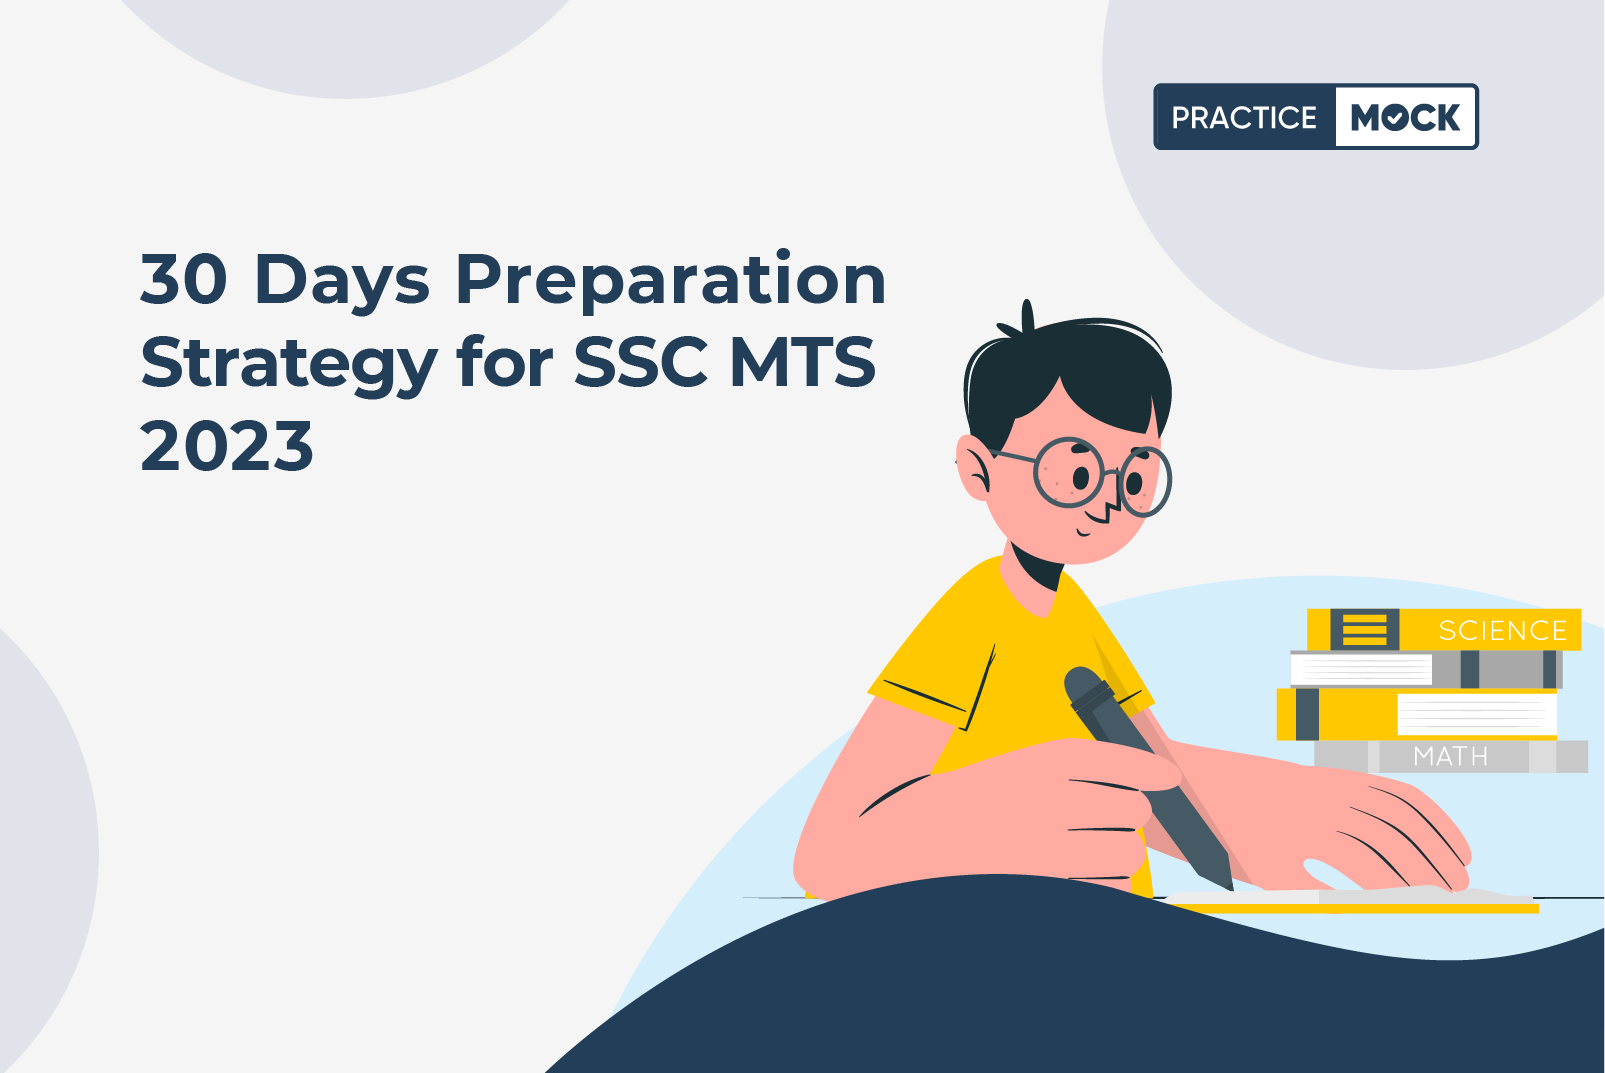 30 days preparation strategy for SSC MTS